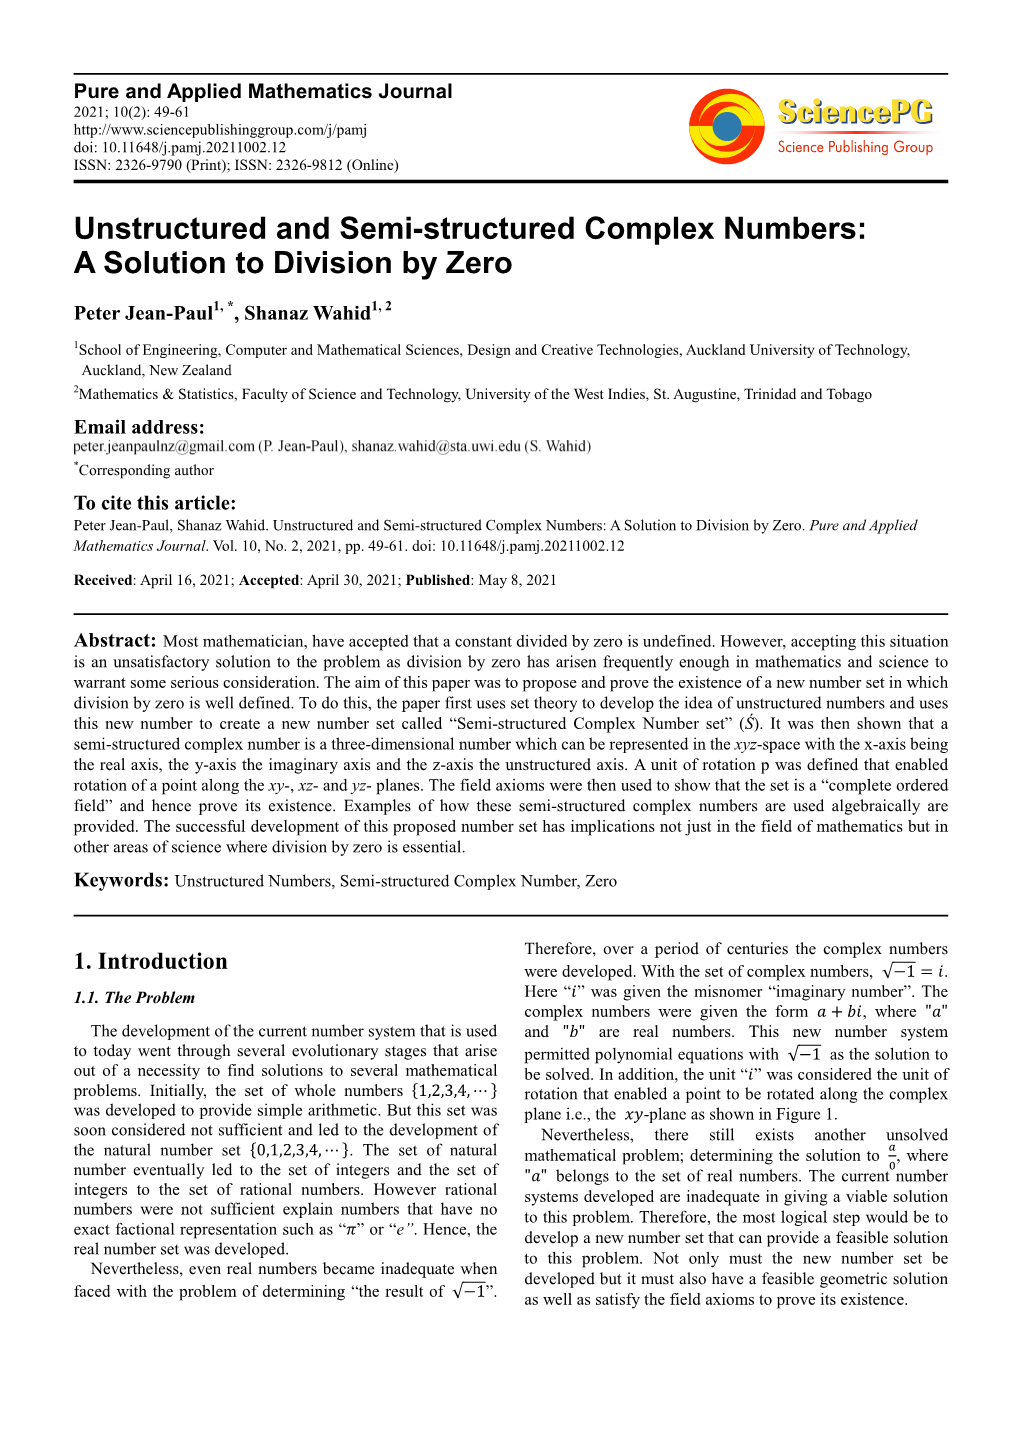 Unstructured and Semi-Structured Complex Numbers: a Solution to Division by Zero